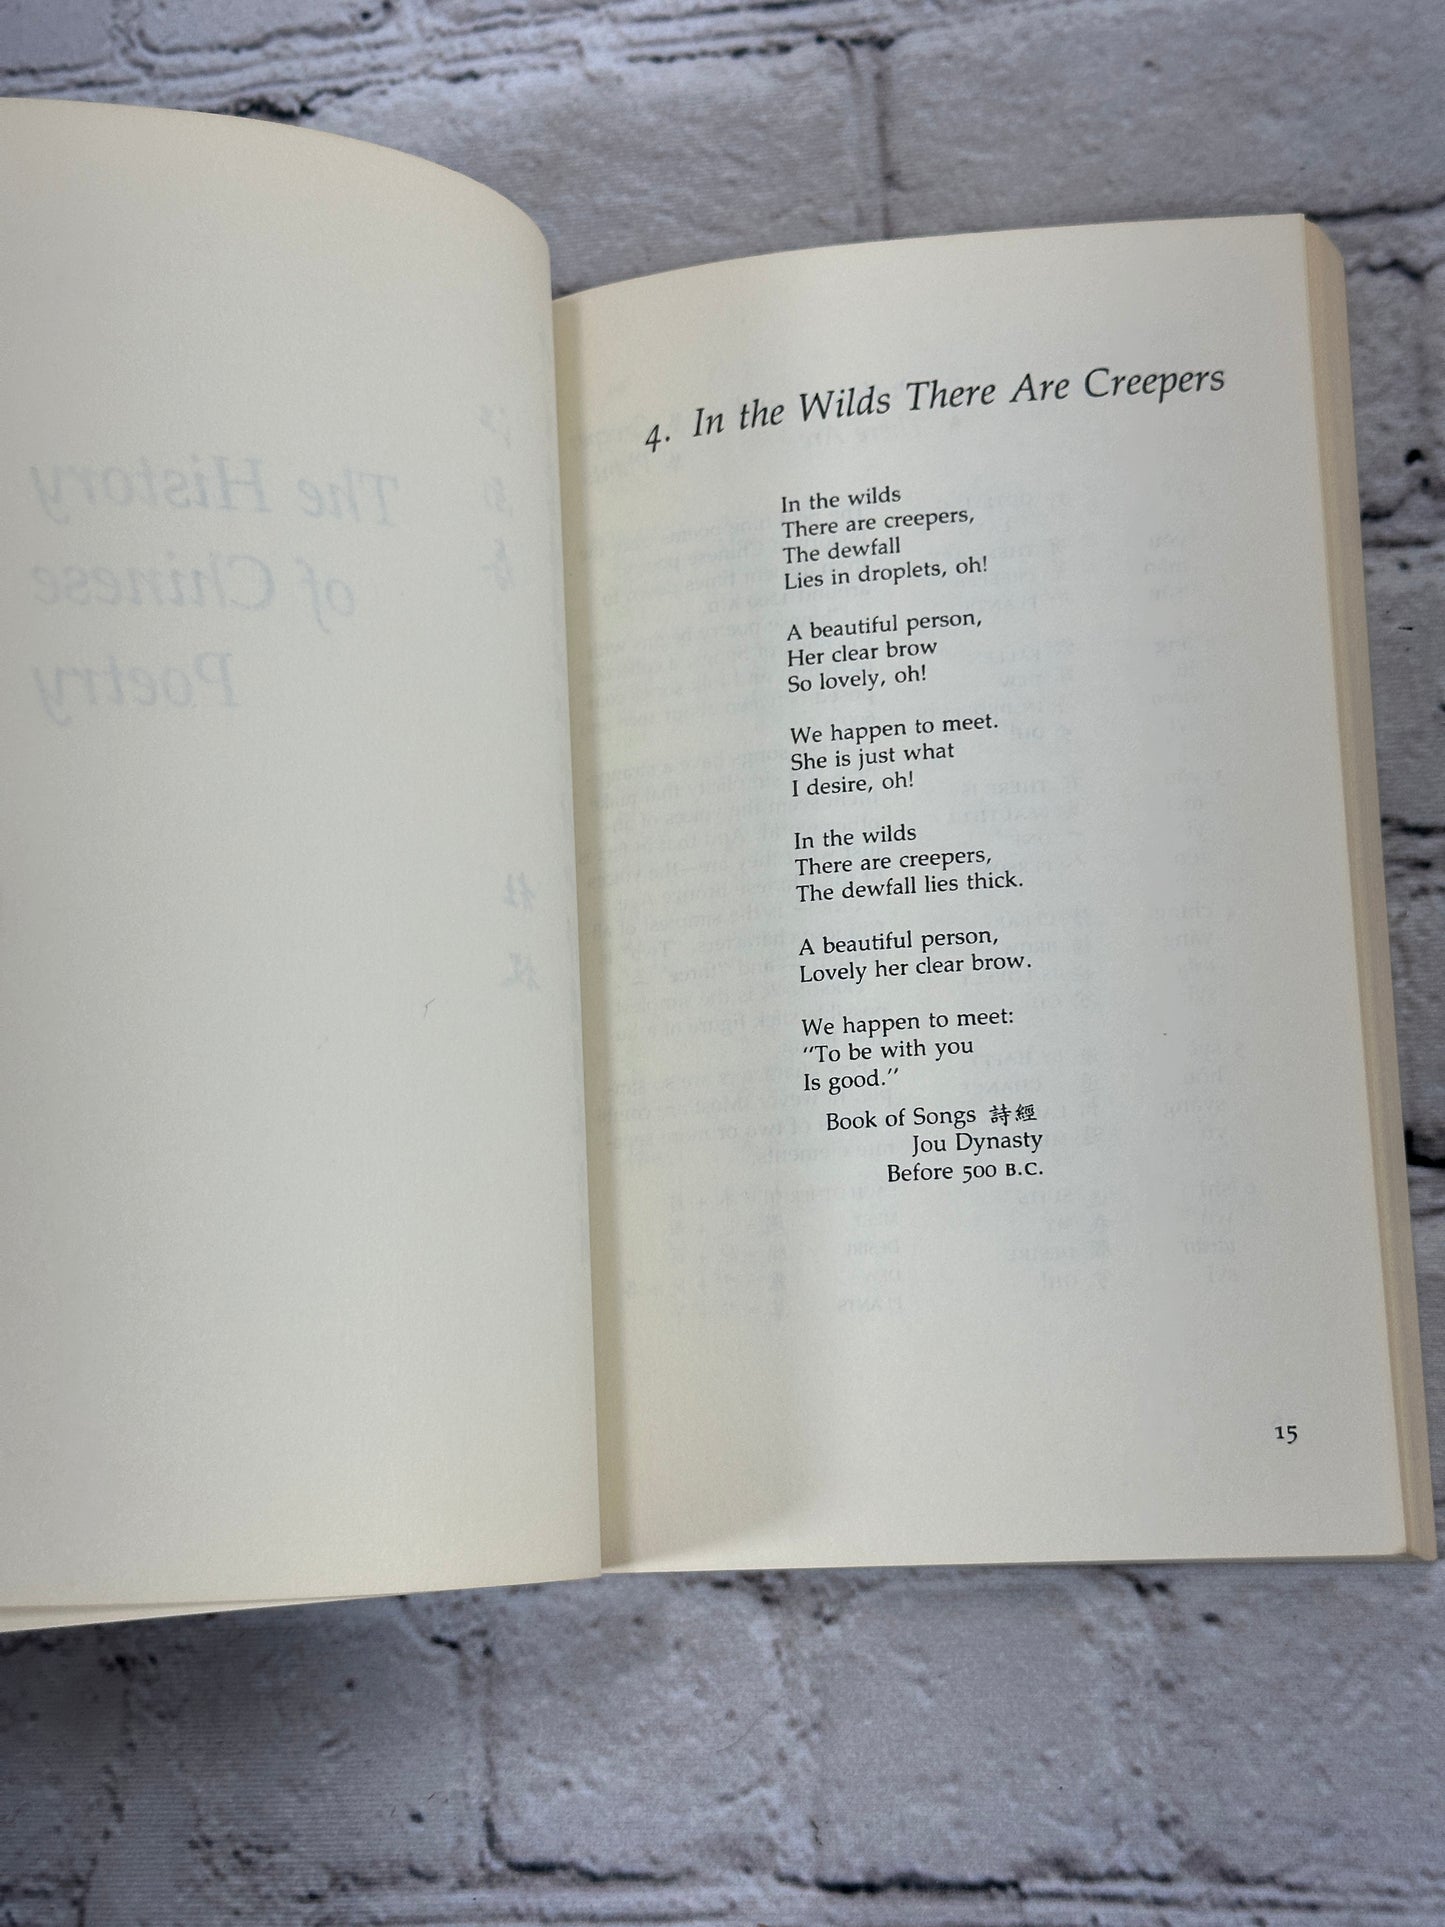 The Heart of Chinese Poetry by Greg Whincup [1987 · First Edition]